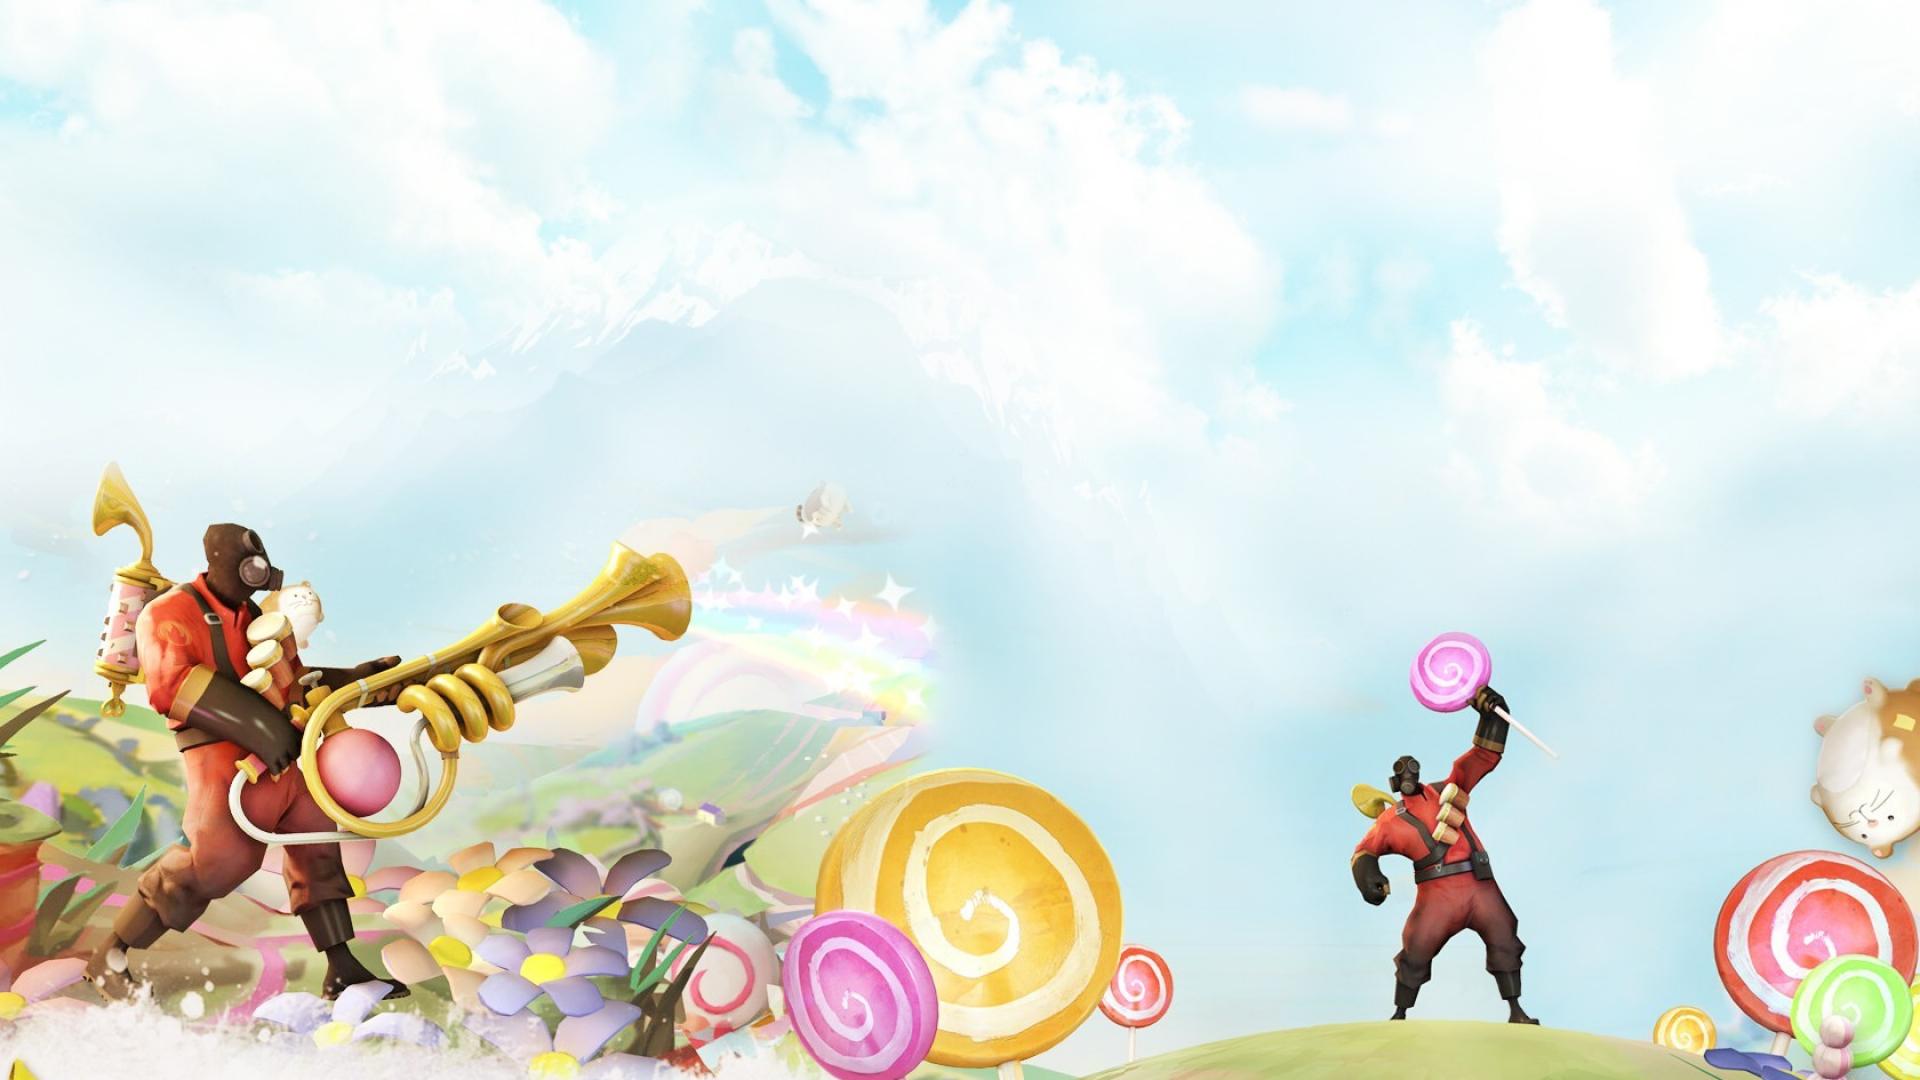 Rainbows Trumpets Team Fortress Pyro Candyland Wallpaper